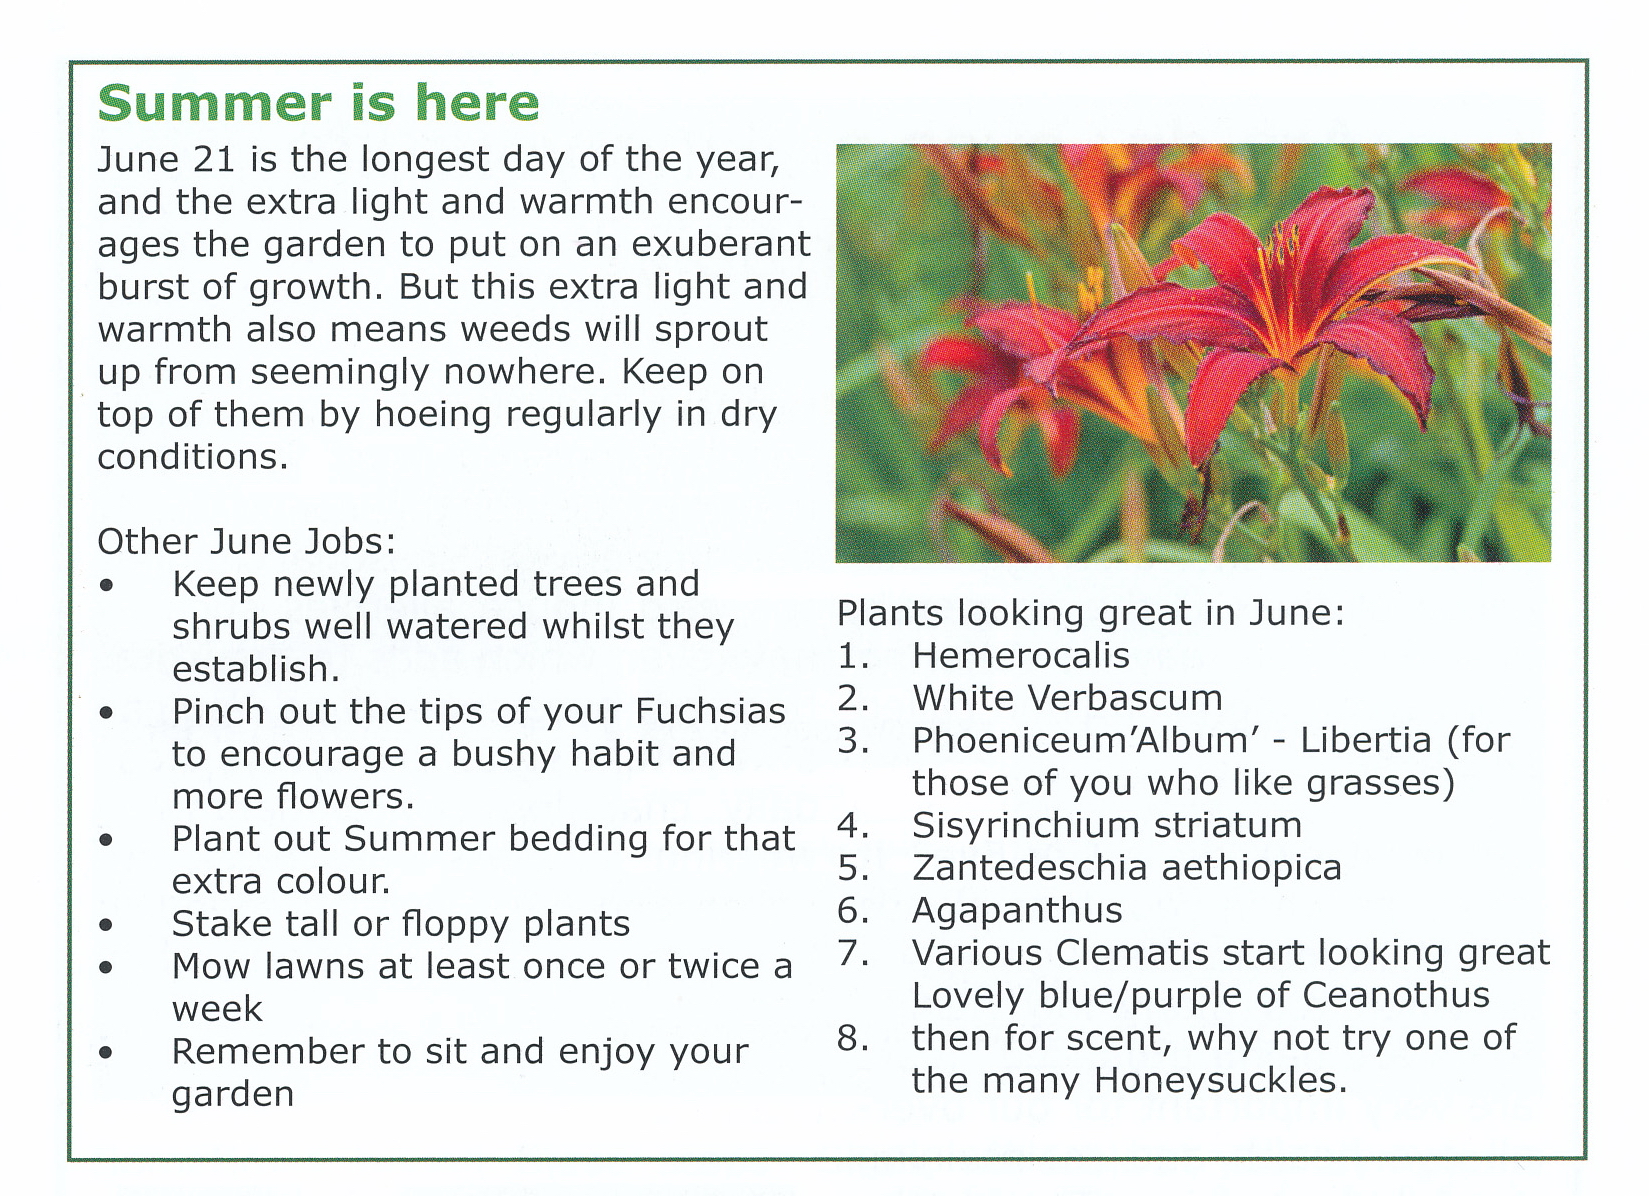 Article about Ten best plants for June and what to do in the Garden in June